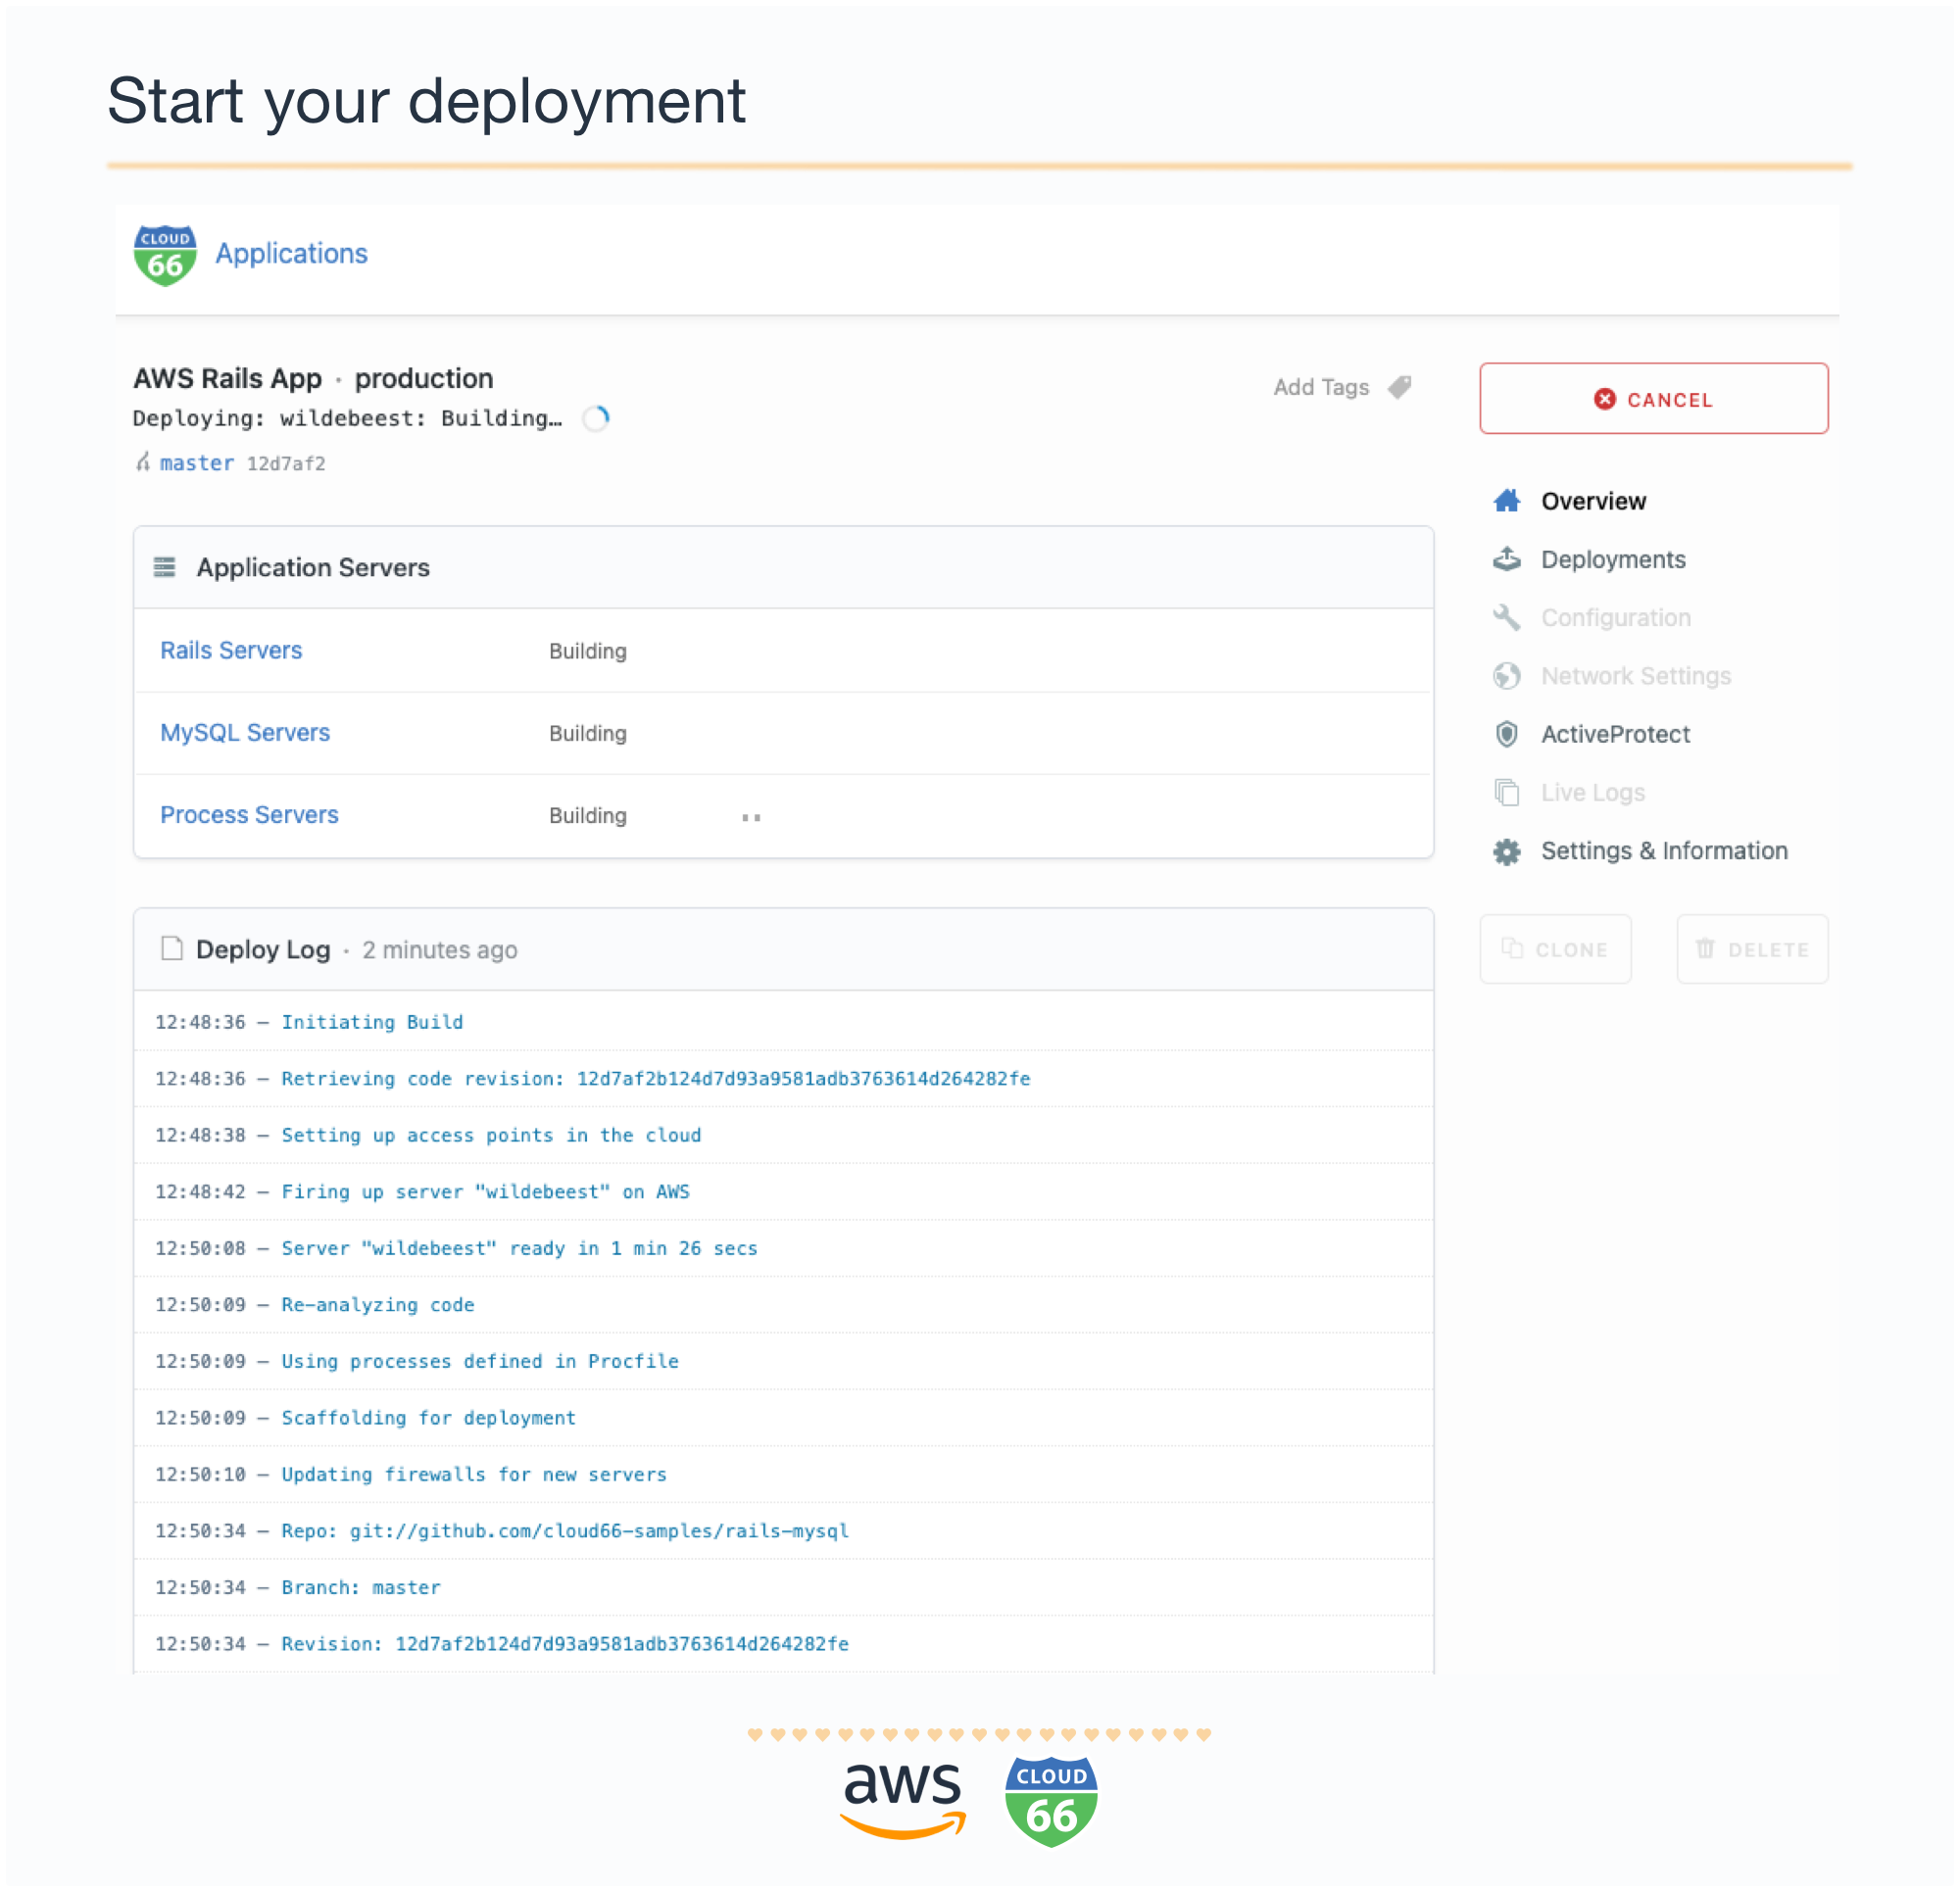 Click on Deploy Application button and see the deployment details